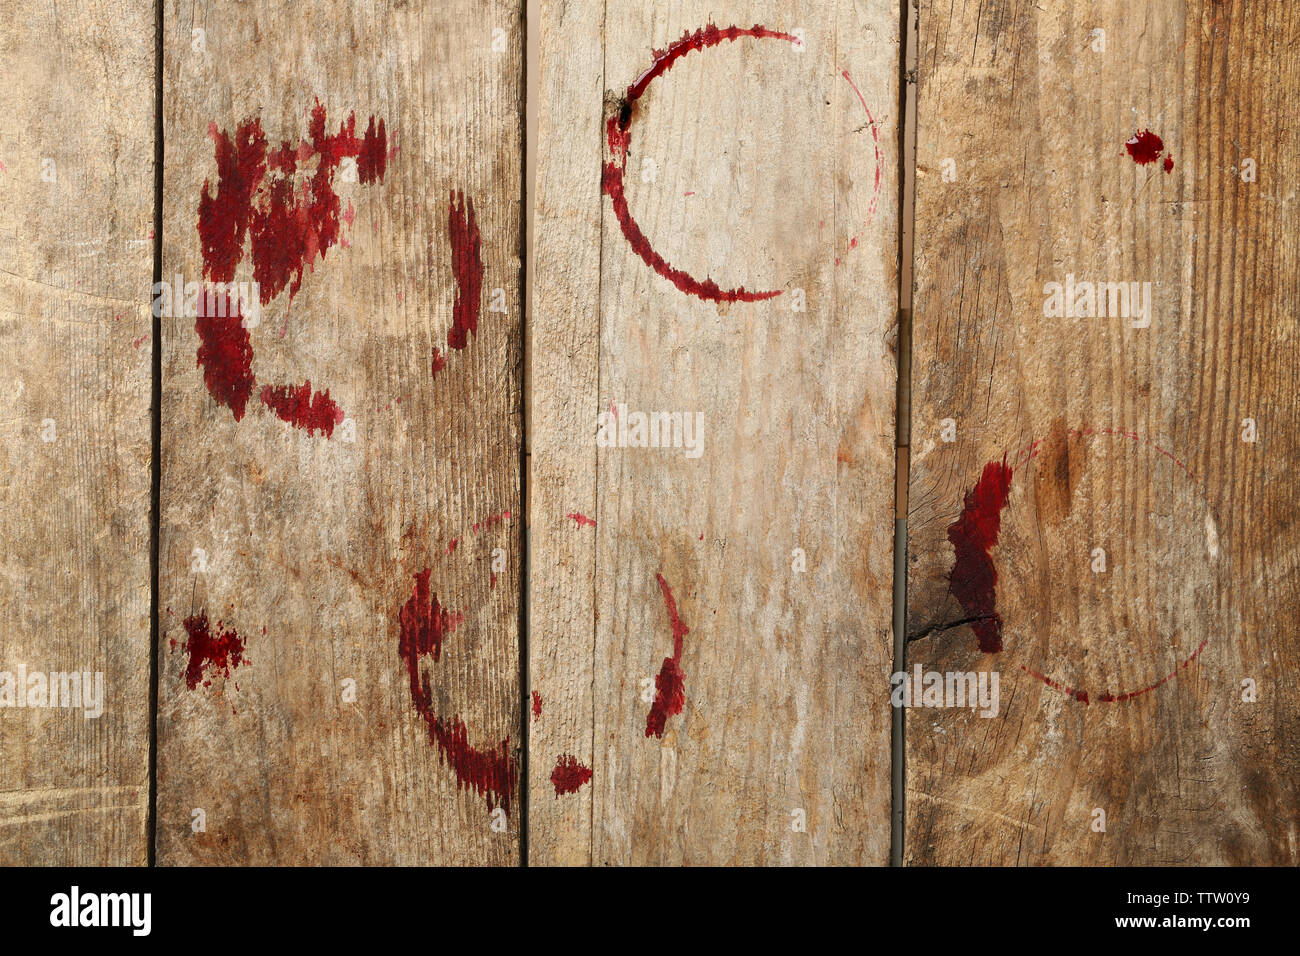 Red wine stains on wooden background Stock Photo - Alamy